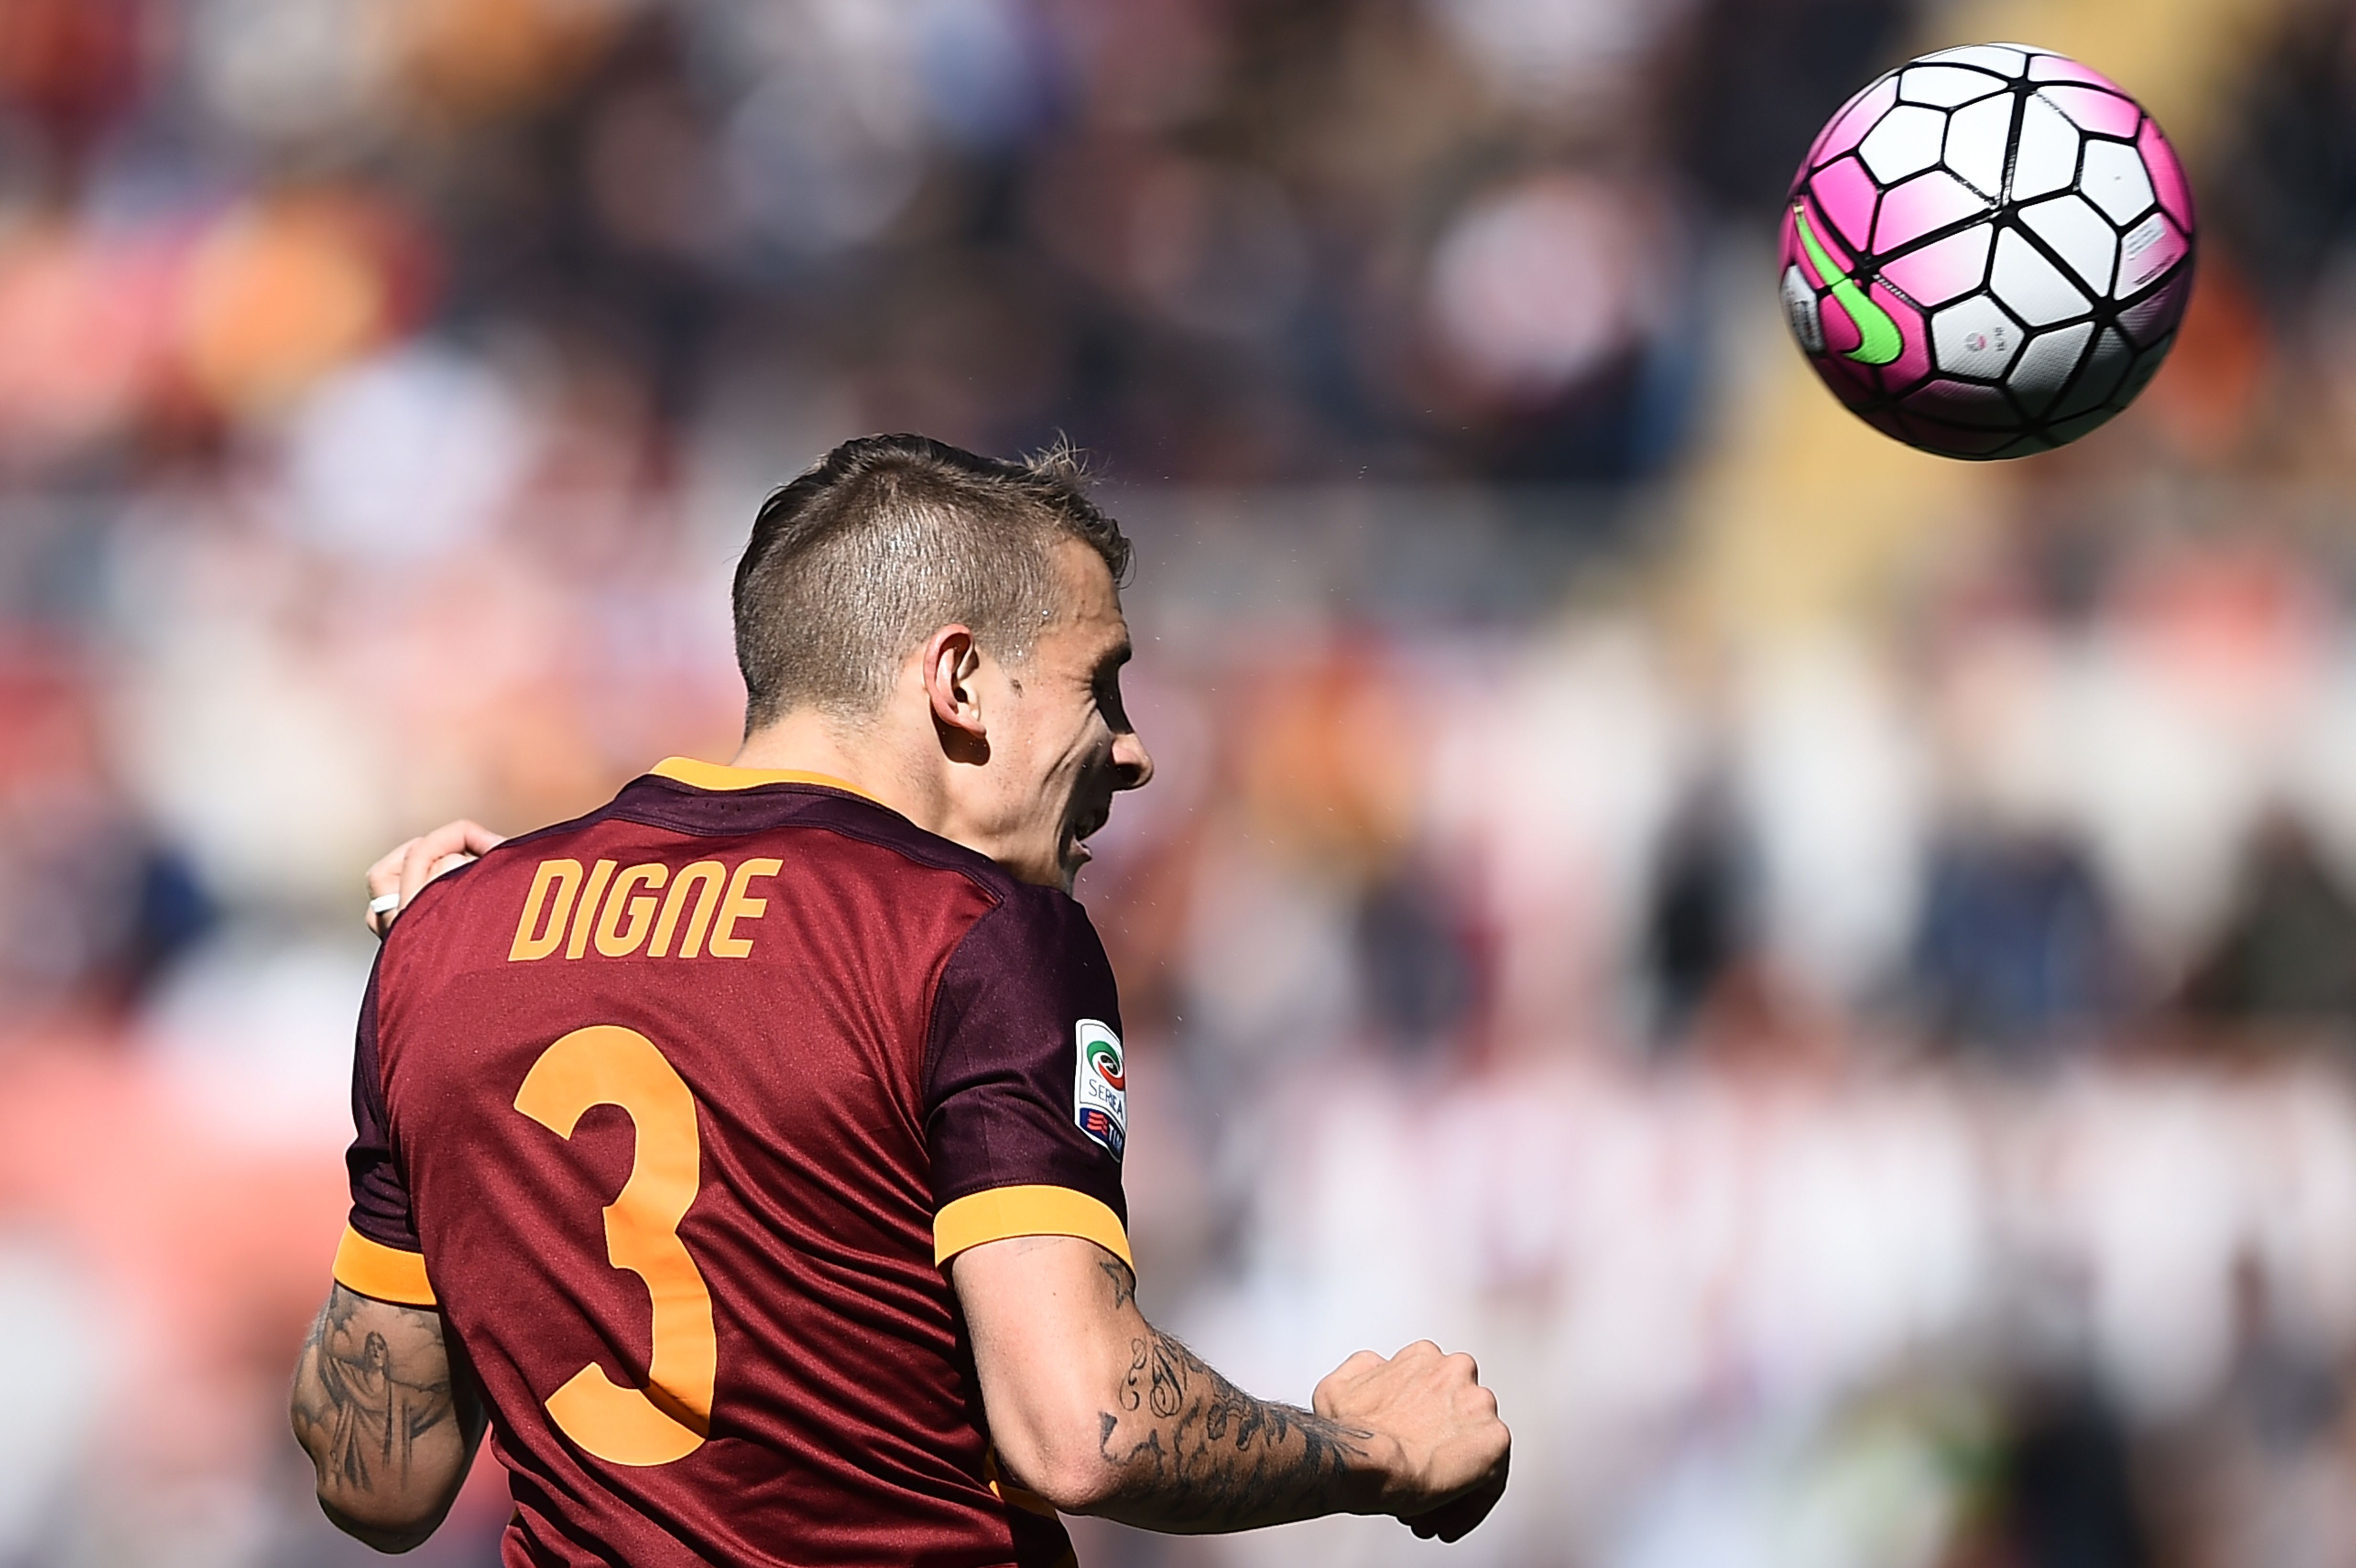 Roma's defender from France Lucas Digne heads the ball during the Italian Serie A football match AS Roma vs Napoli on April 25, 2016 at the Olympic Stadium in Rome.   AFP PHOTO / FILIPPO MONTEFORTE / AFP / FILIPPO MONTEFORTE        (Photo credit should read FILIPPO MONTEFORTE/AFP/Getty Images)